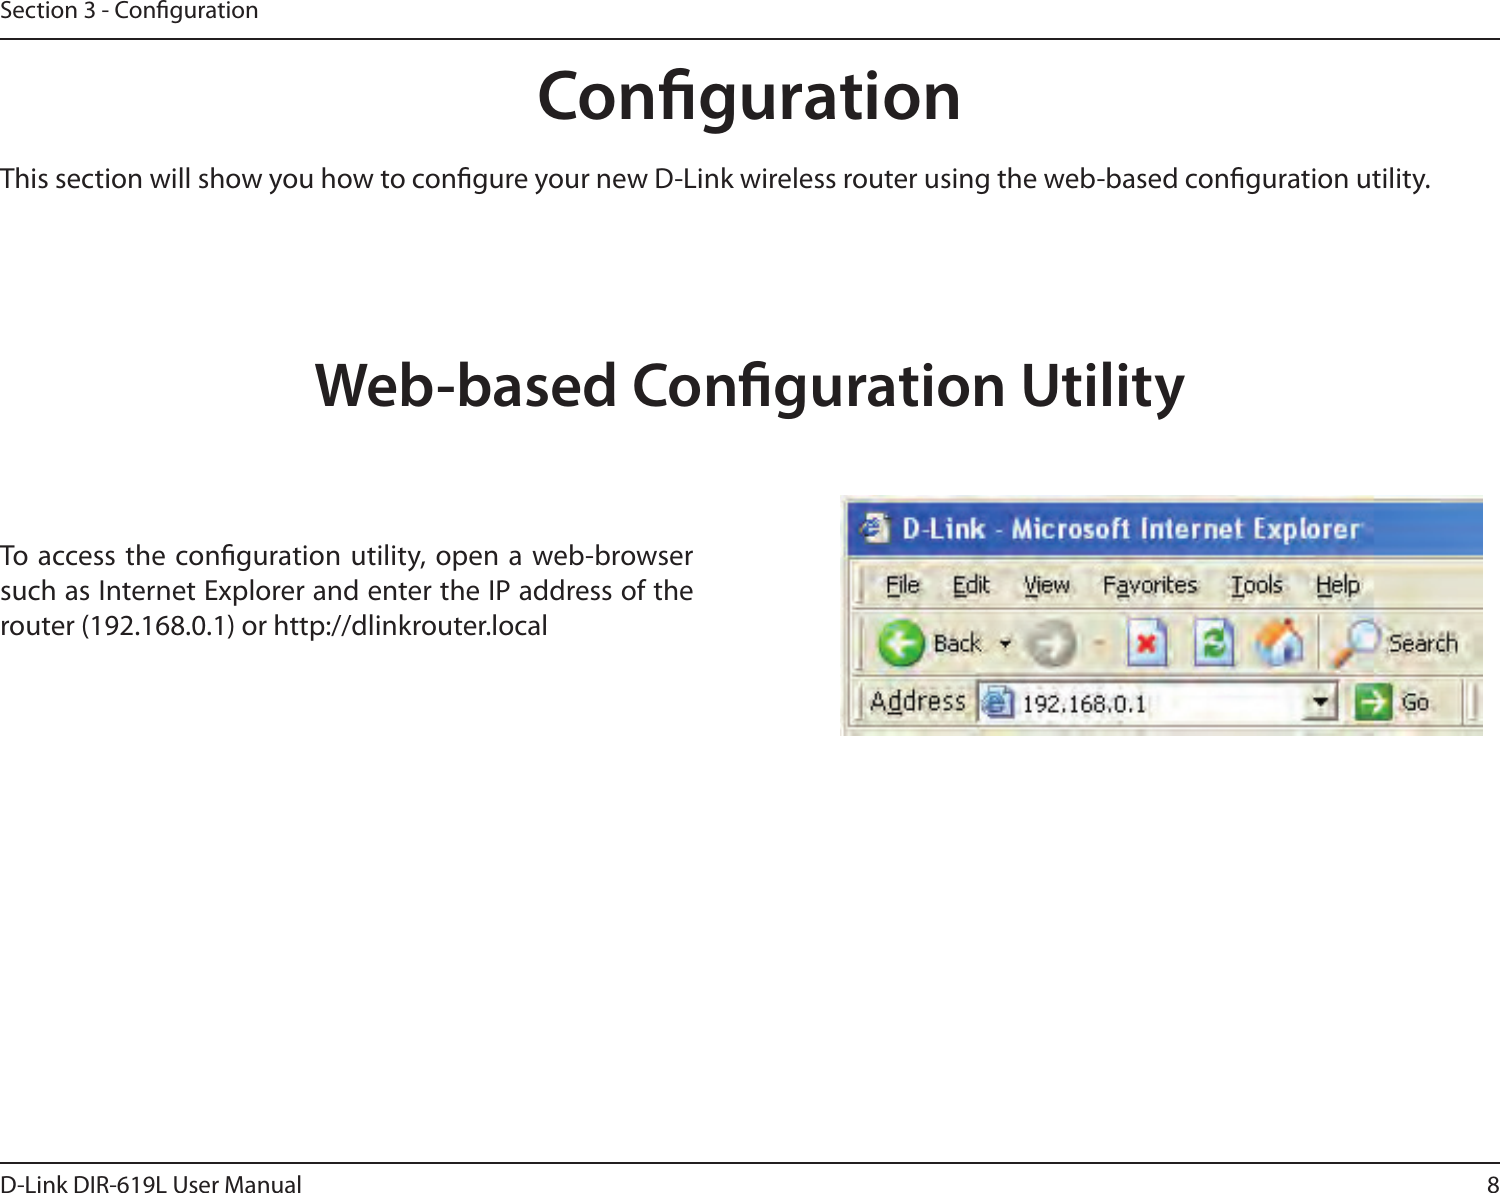 8D-Link DIR-619L User ManualSection 3 - CongurationCongurationThis section will show you how to congure your new D-Link wireless router using the web-based conguration utility.Web-based Conguration UtilityTo  access the conguration utility,  open a  web-browser such as Internet Explorer and enter the IP address of the router (192.168.0.1) or http://dlinkrouter.local